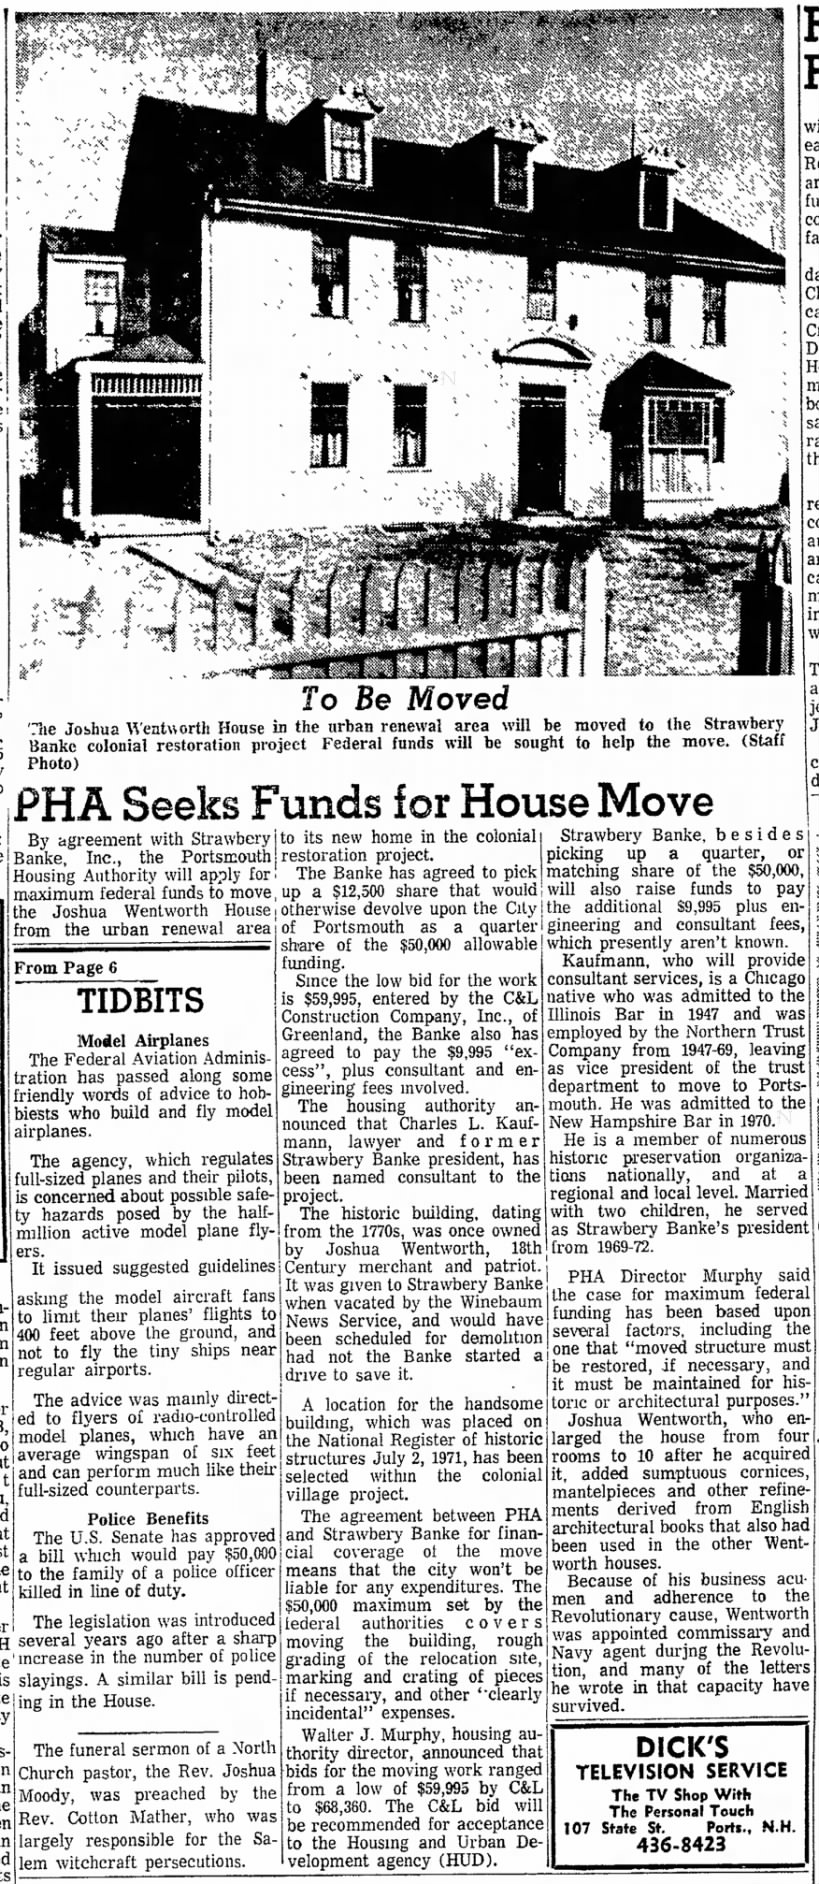 PHA Seeks Funds for House Move